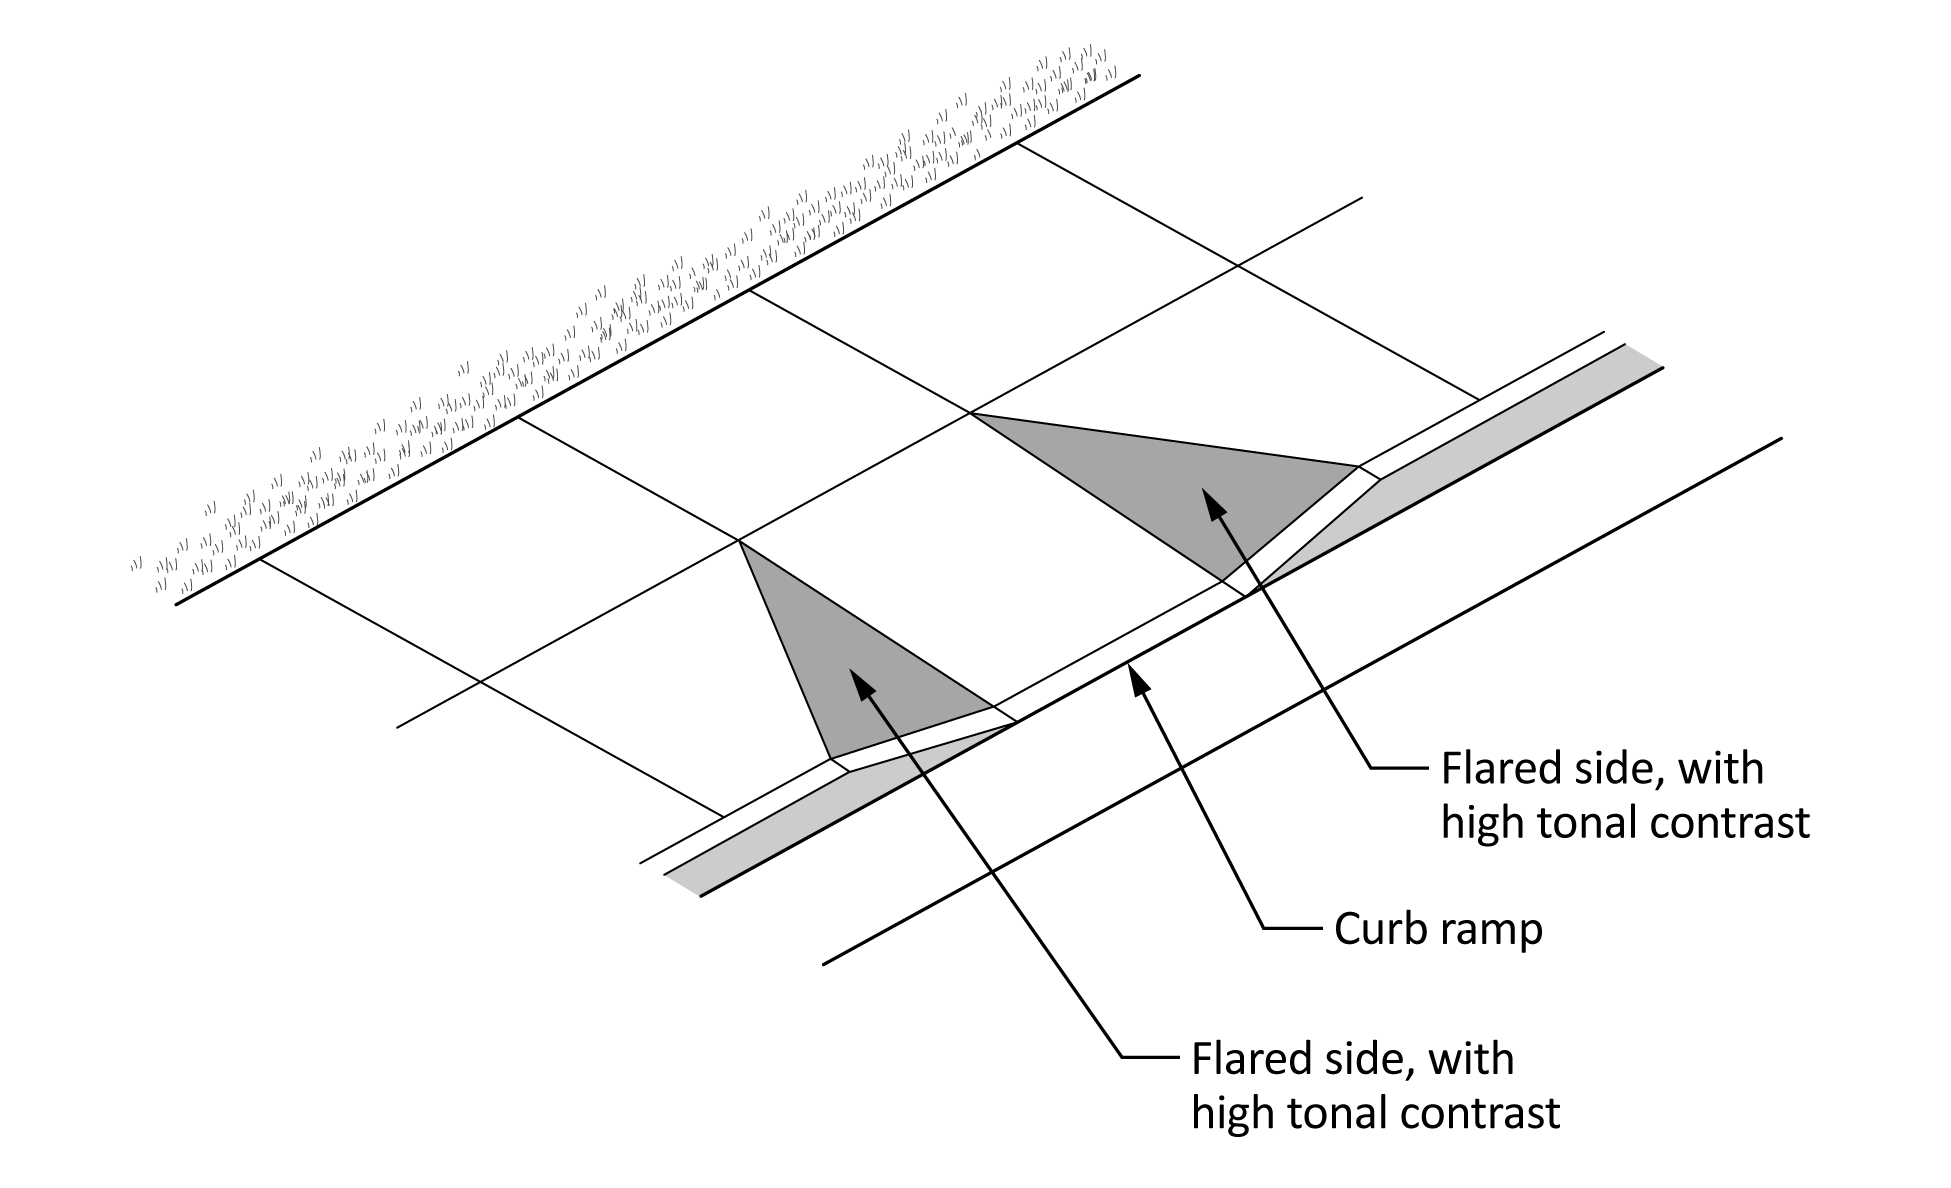 This figure shows a sidewalk as seen from above, with a curb ramp sloping down to the street and concrete flared sides, with high tonal contrast, on either side of the curb ramp.